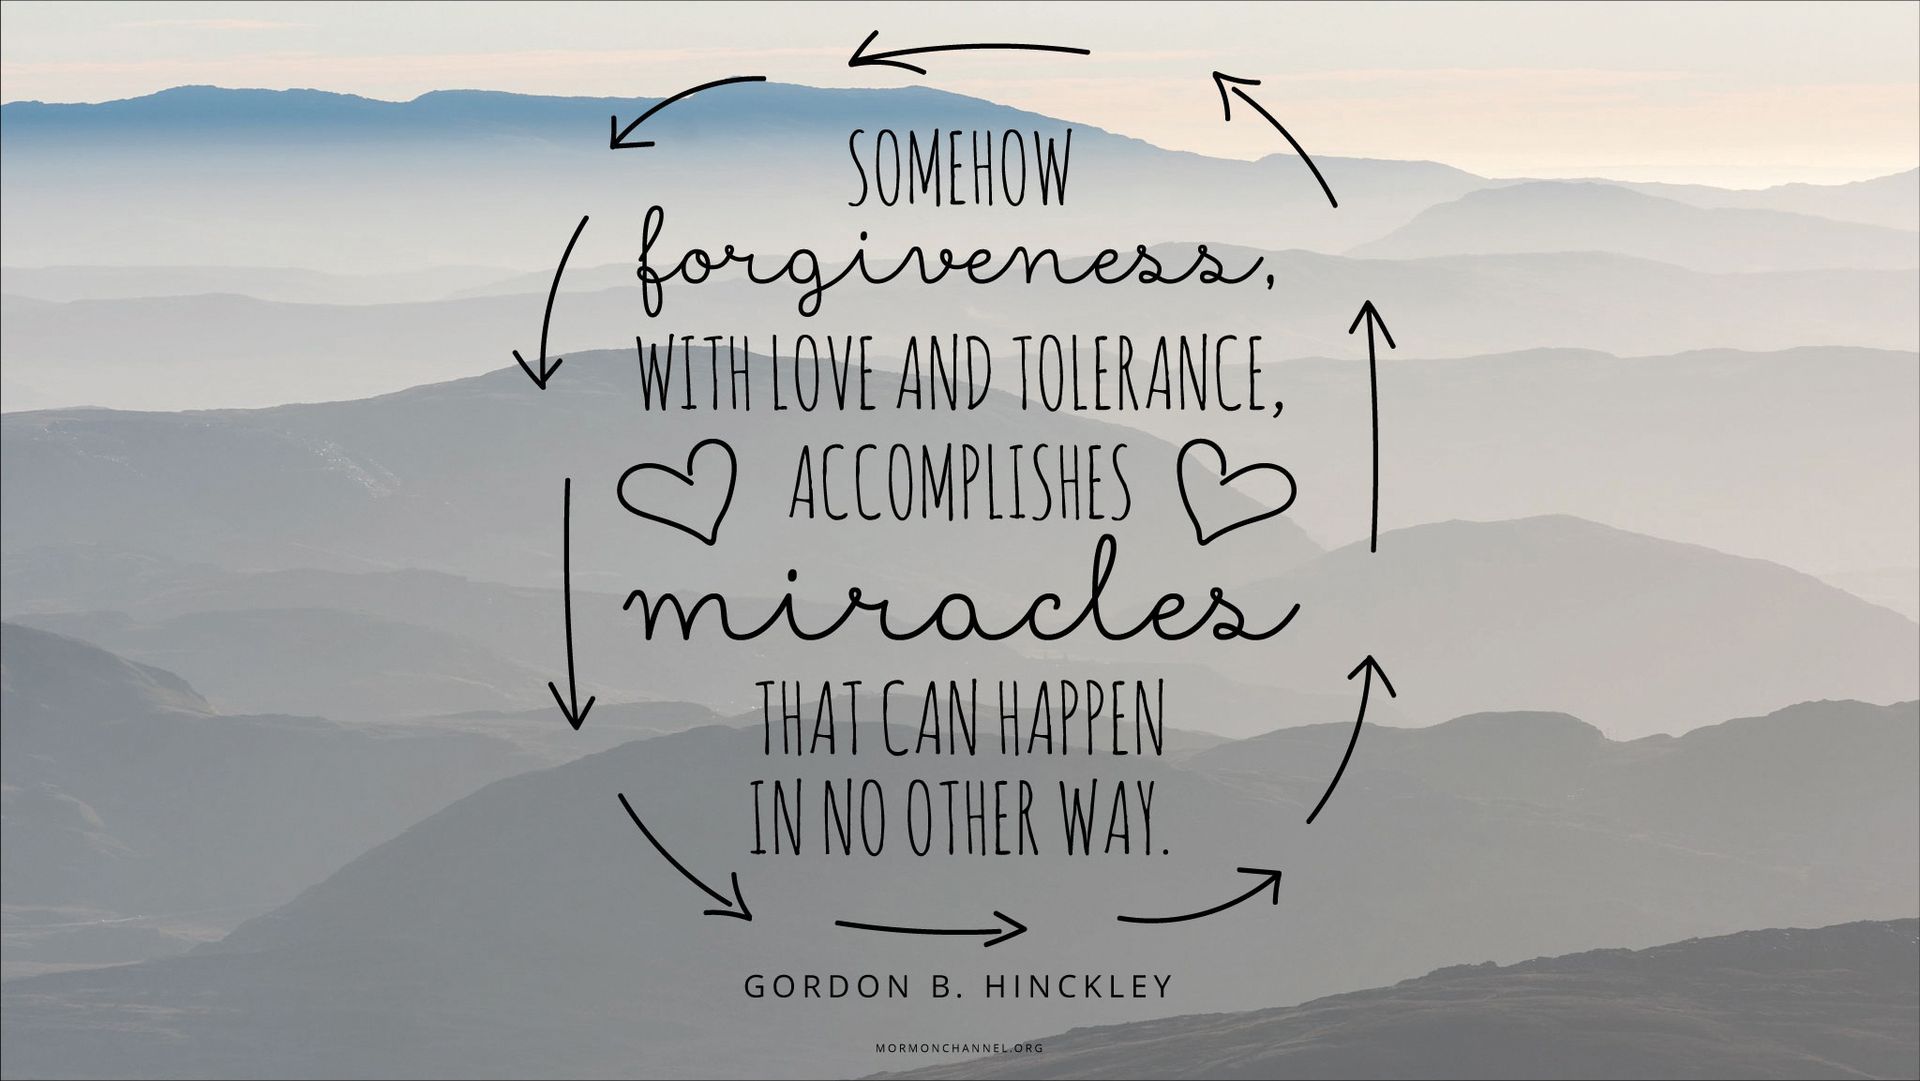 “Somehow forgiveness, with love and tolerance, accomplishes miracles that can happen in no other way.”—President Gordon B. Hinckley, “Forgiveness”